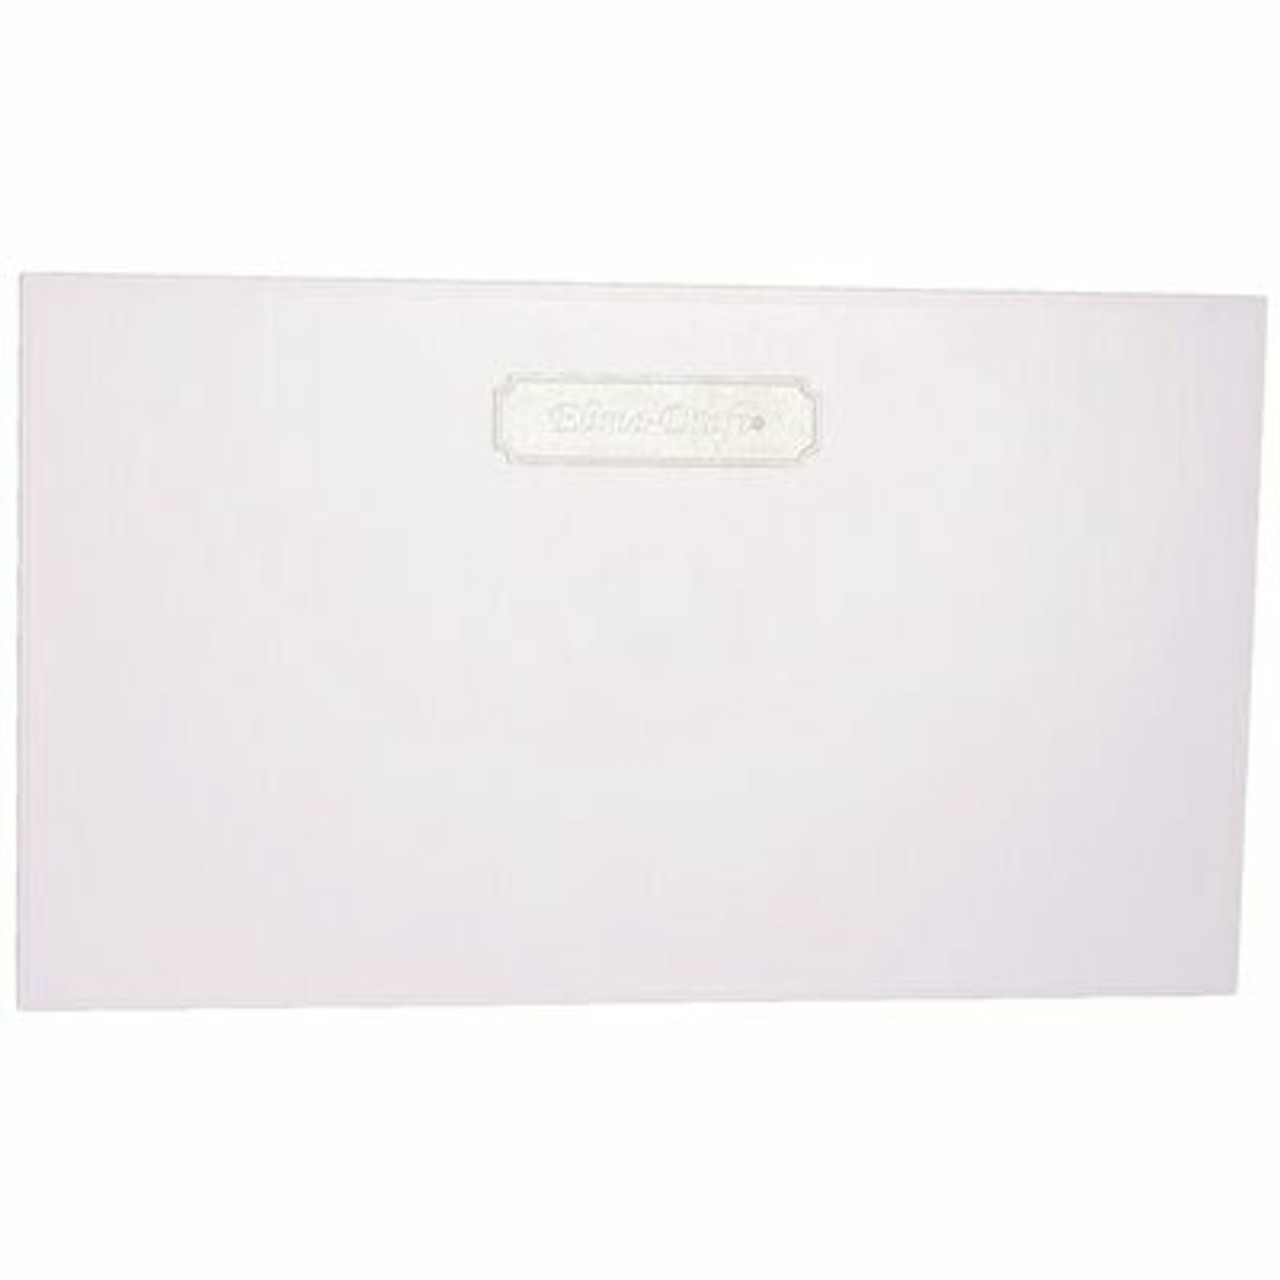 Elima-Draft 4-In-1 Insulated Magnetic Register/Vent Cover In White